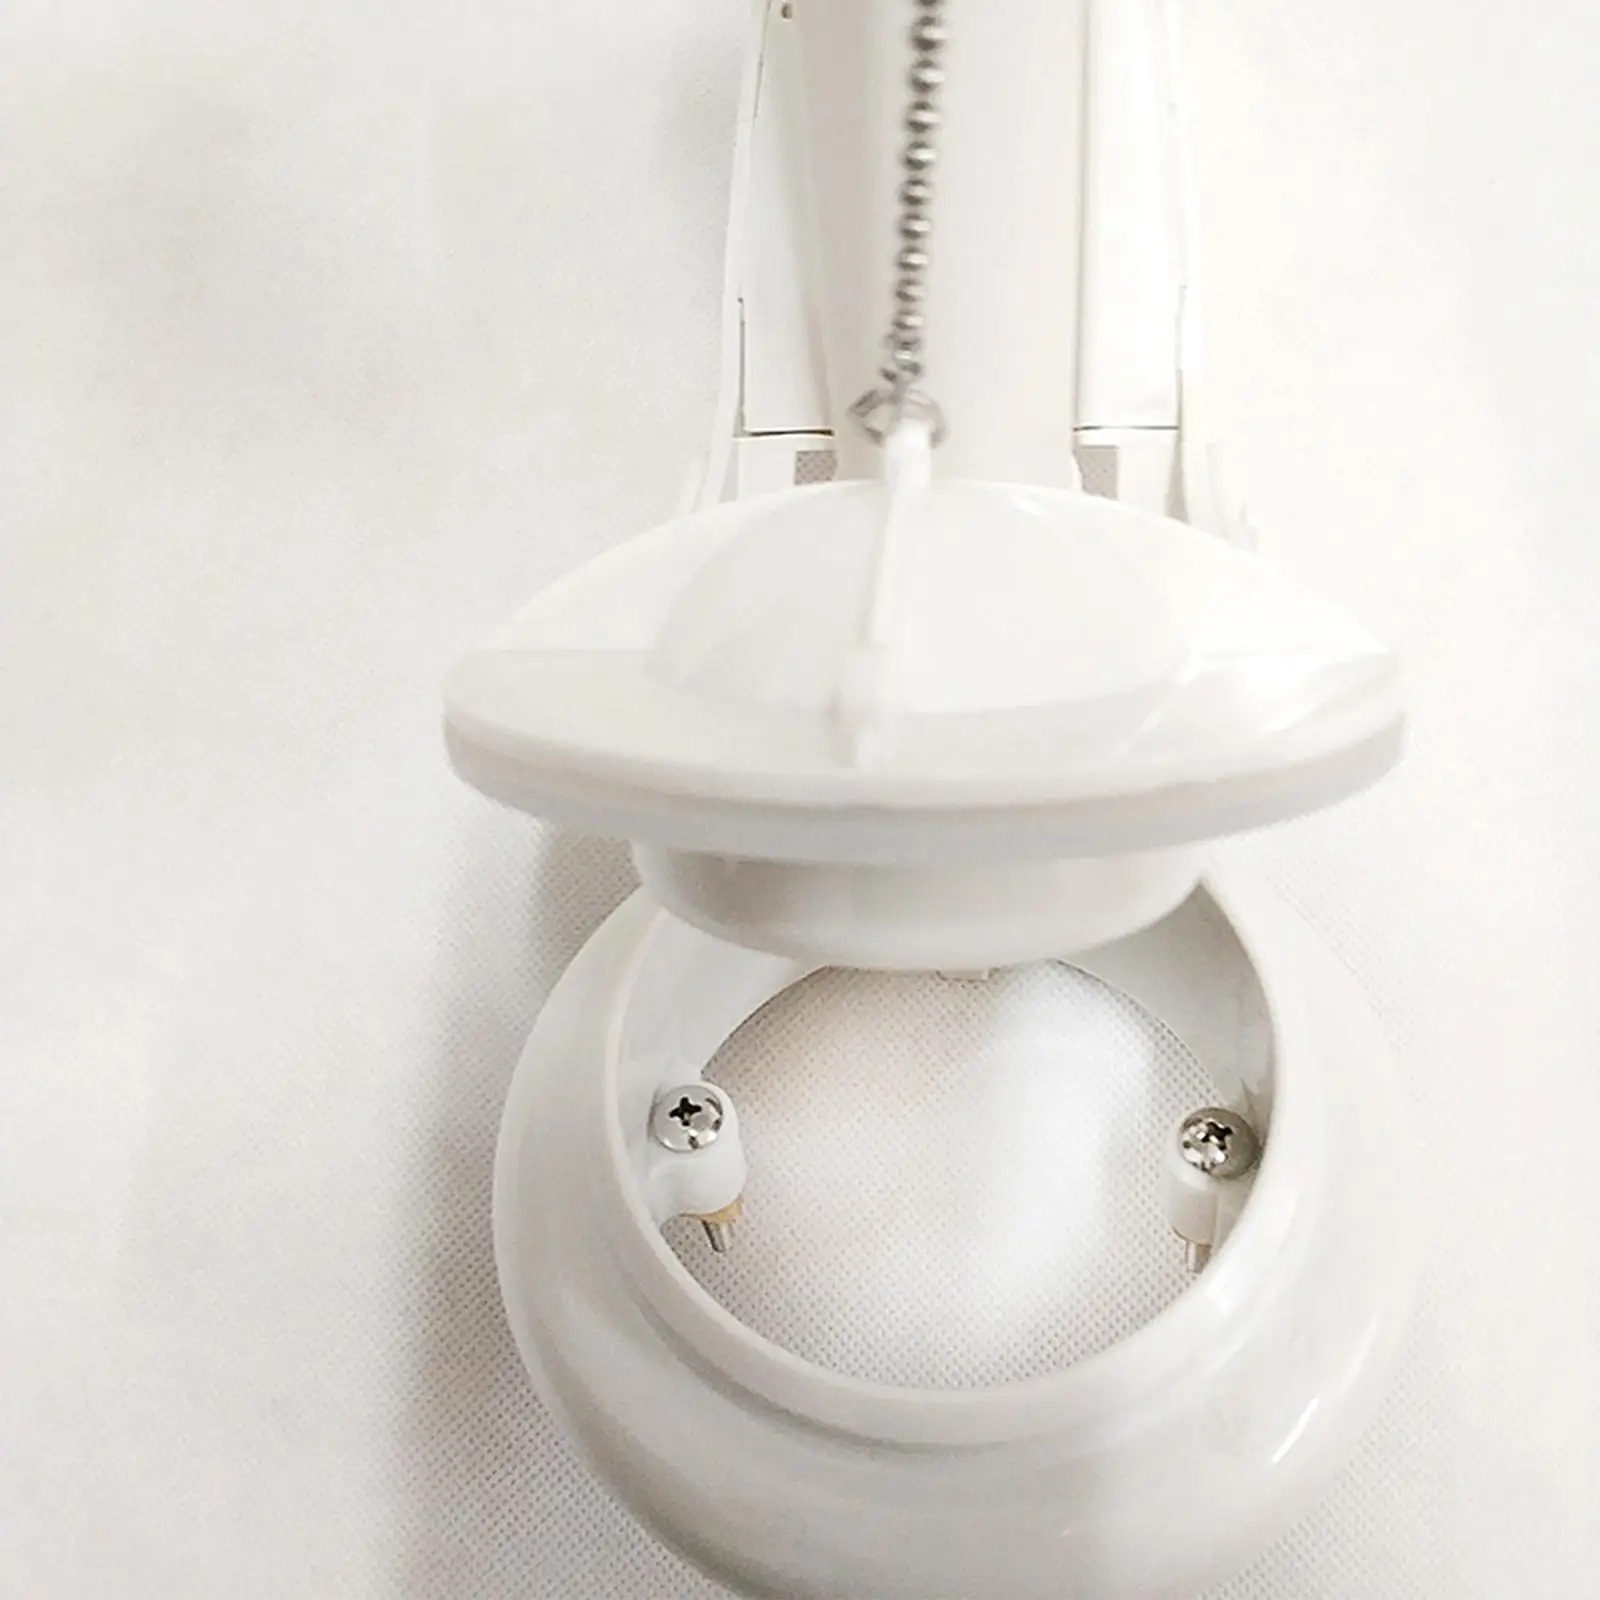 Toilet Flush Valves Repair Parts Toilet Seat Accessories with , Chain Replace High Performance Toilet Drain Valve